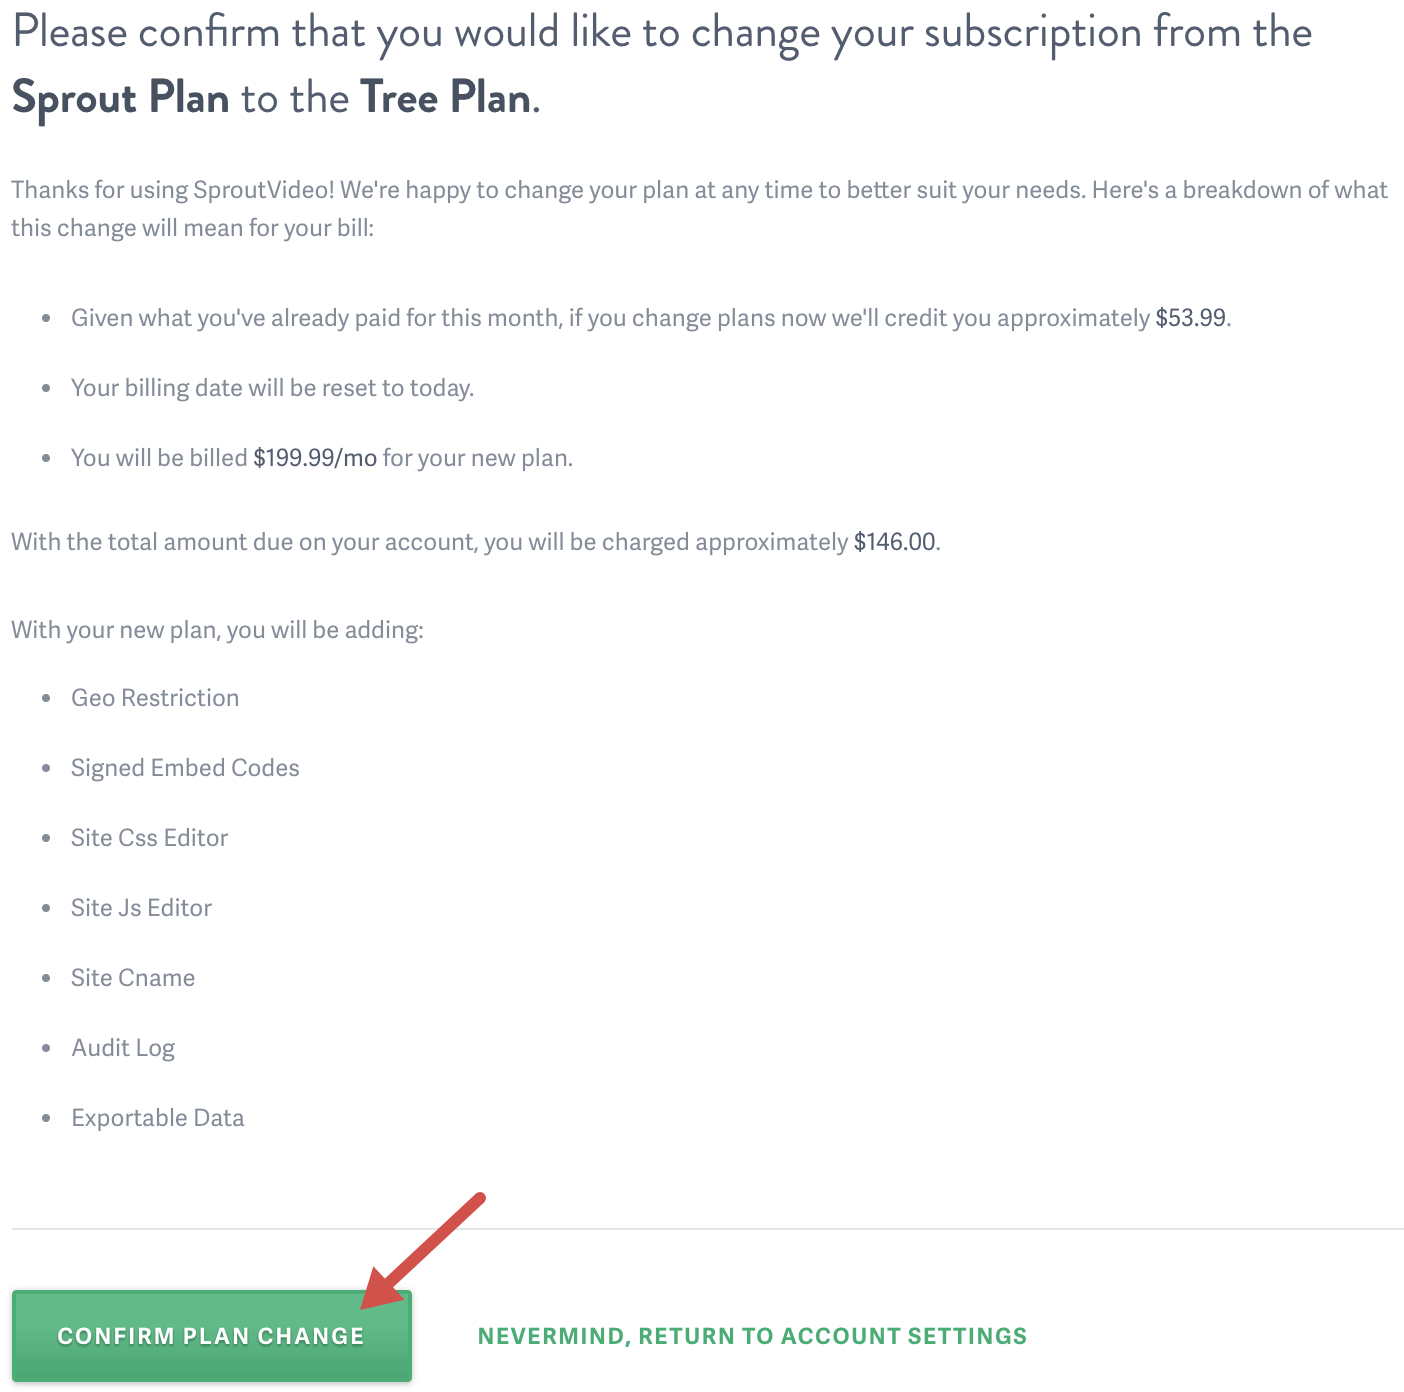 Confirm SproutVideo plan change